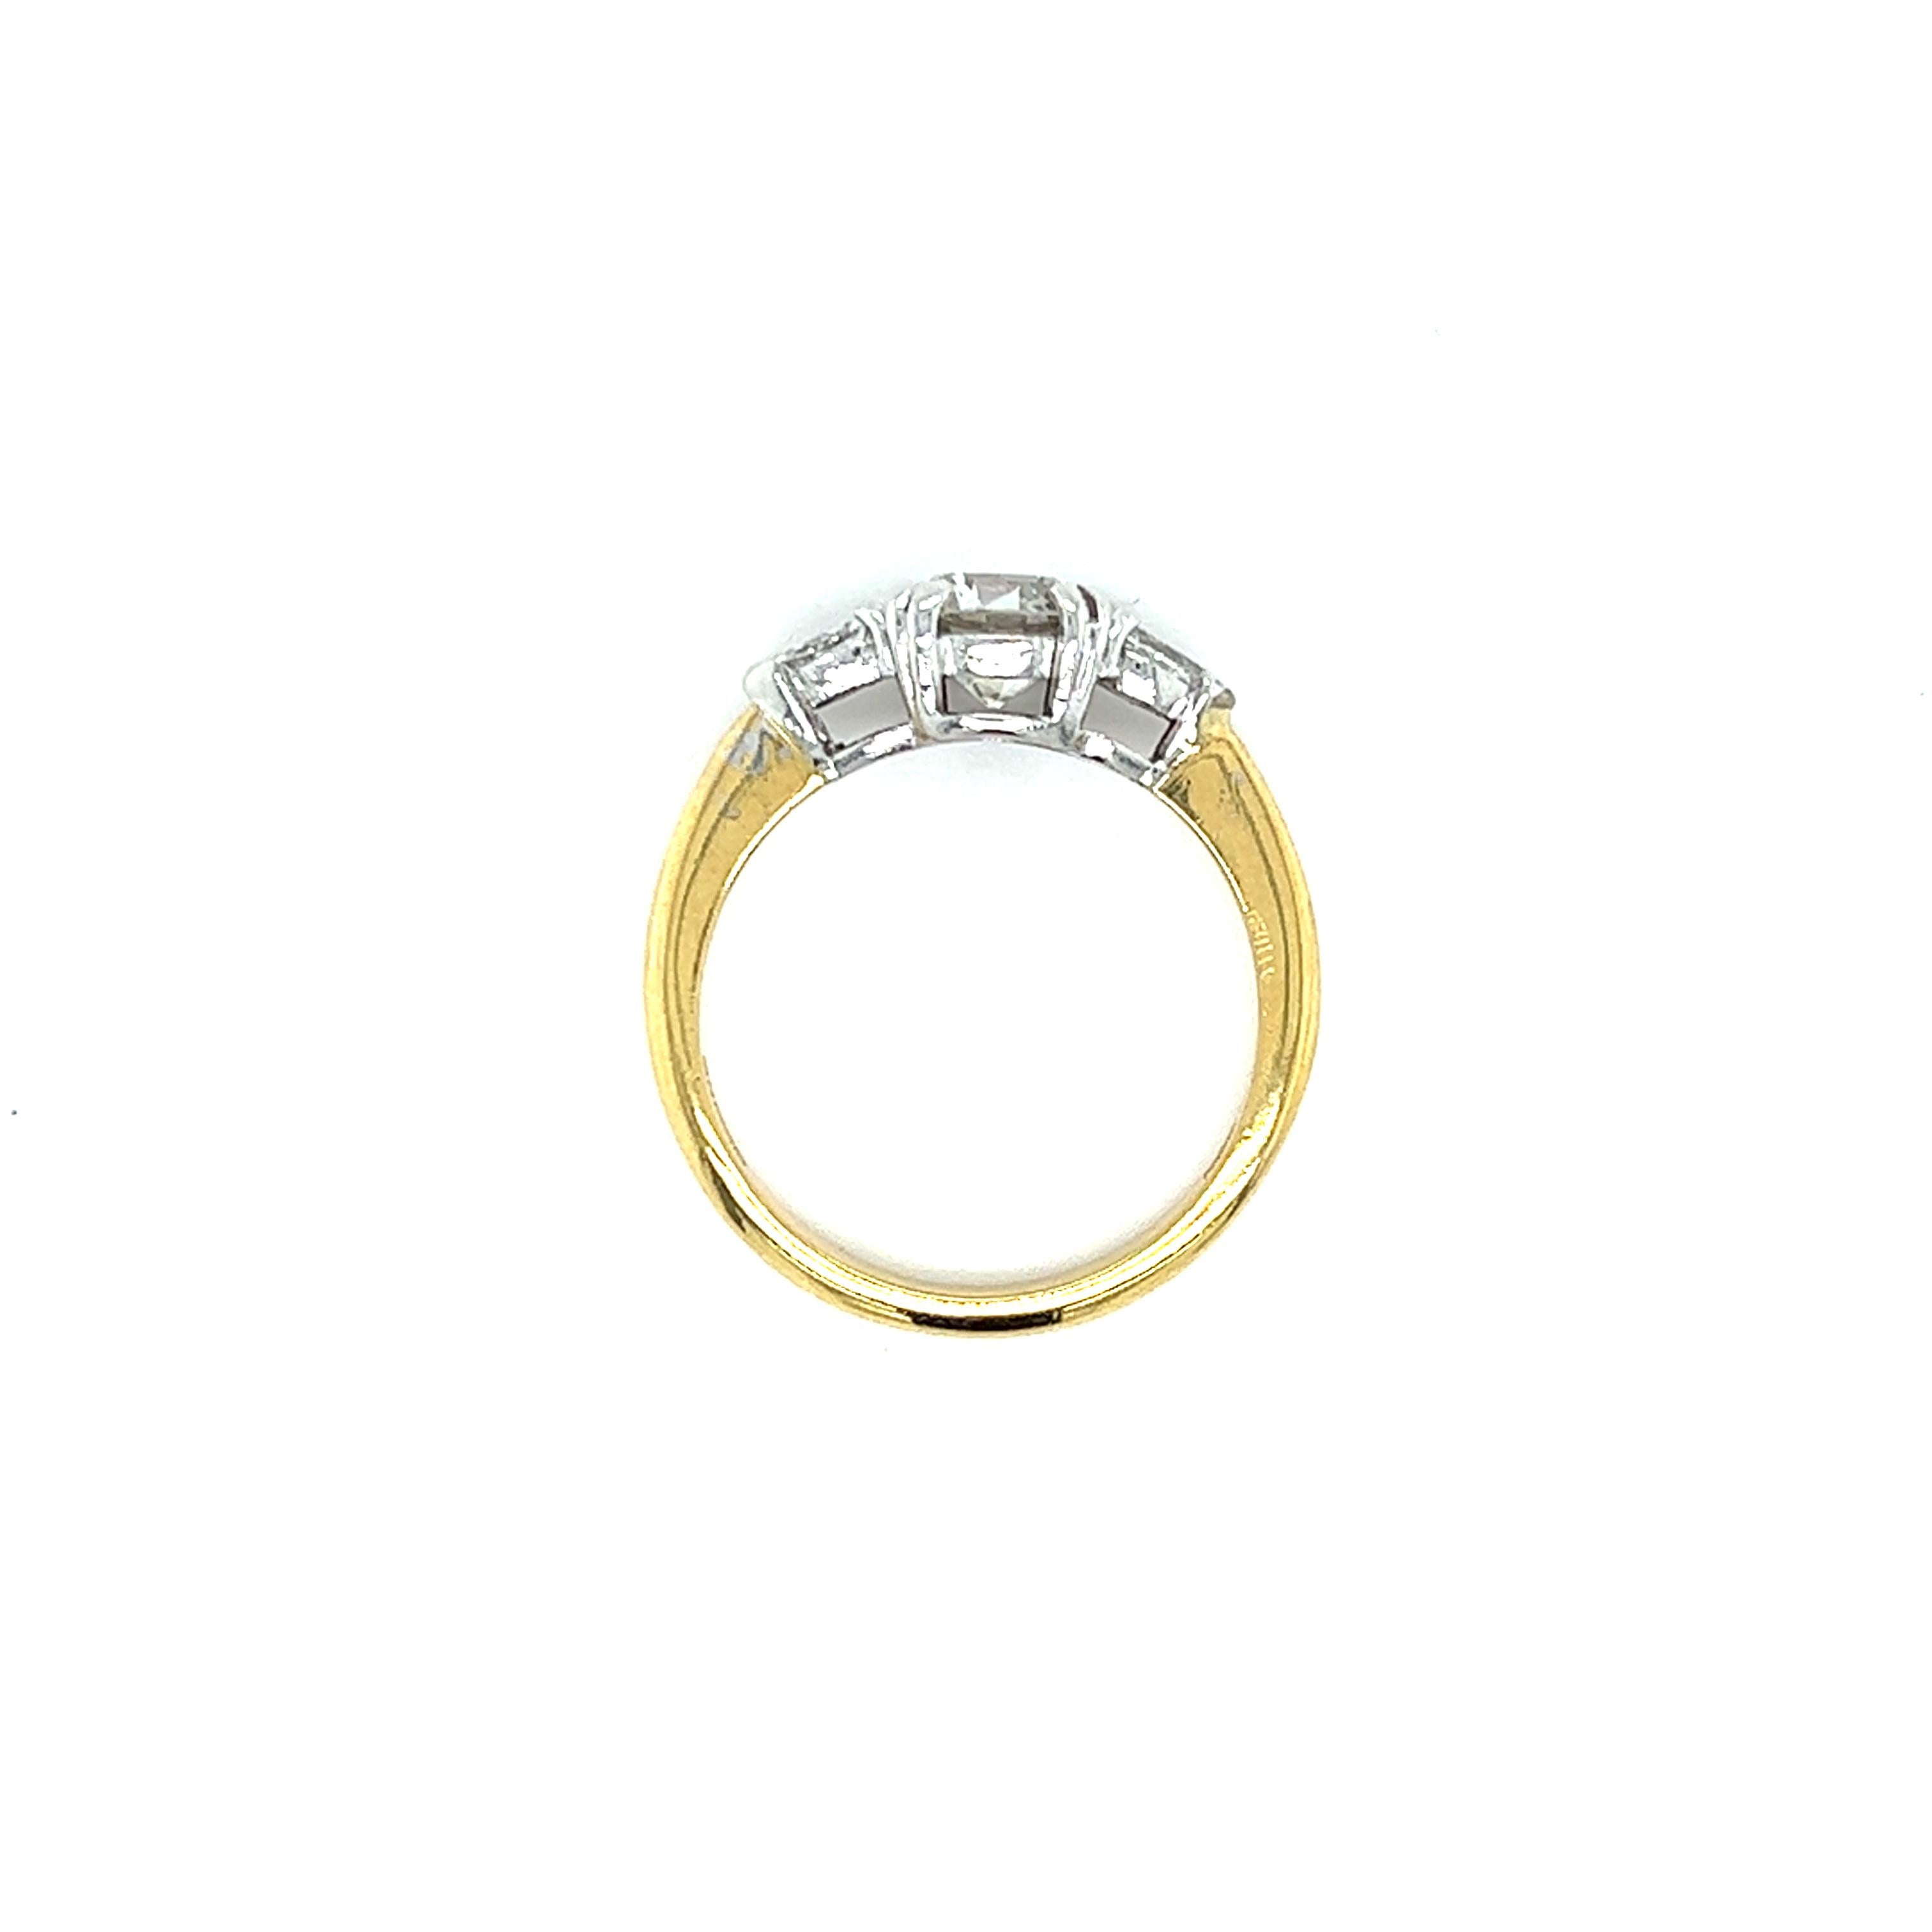 Contemporary 1.42ctw Old European Cut Diamond Engagement Ring in 18k White and Yellow Gold For Sale